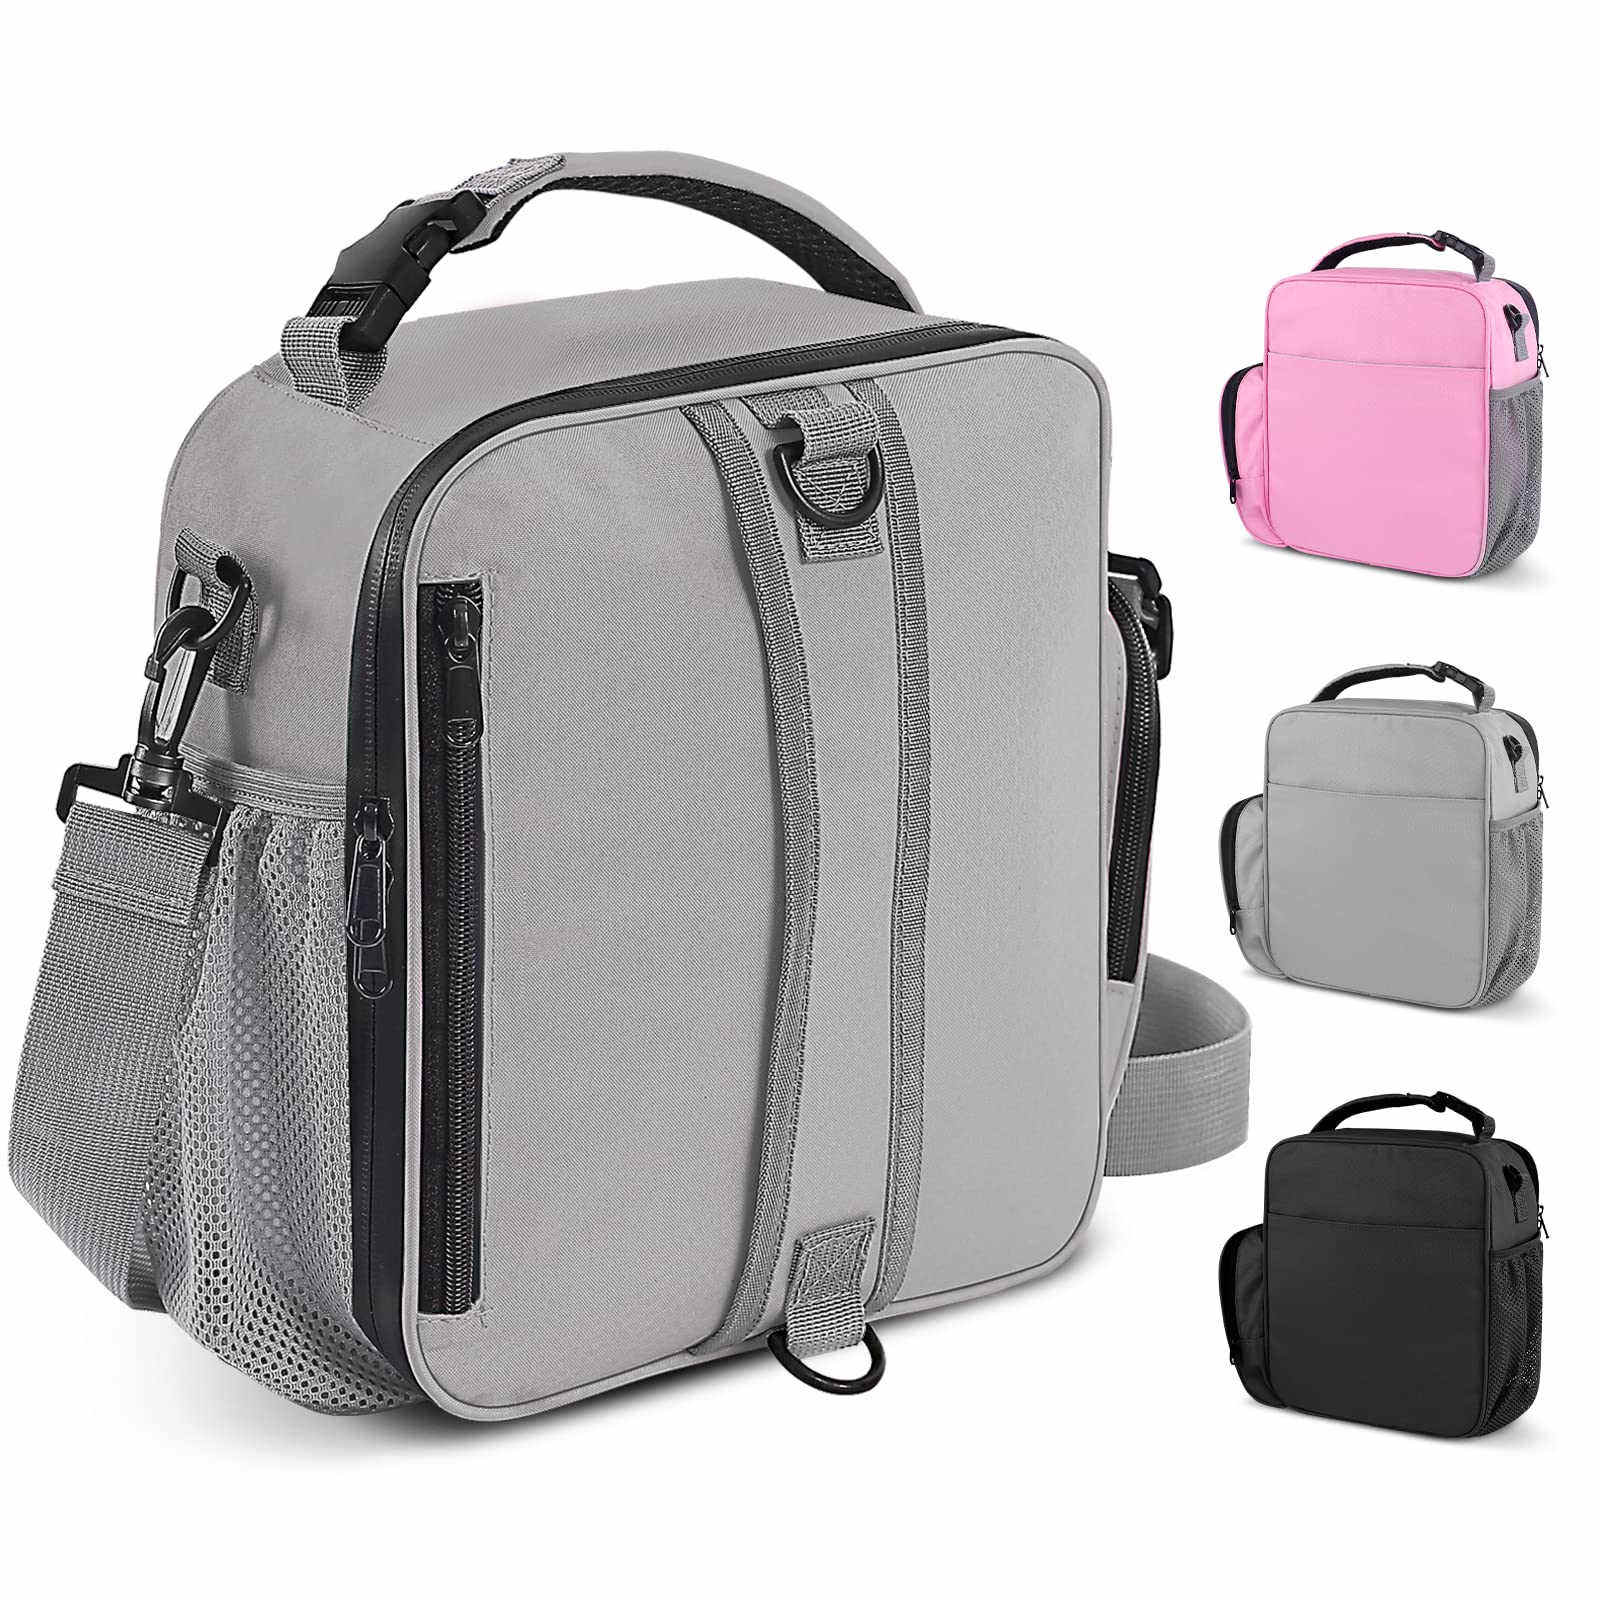 Wholesale Soft Leak proof School Lunch thermal Bag for Office Work Picnic Beach Travel Gym